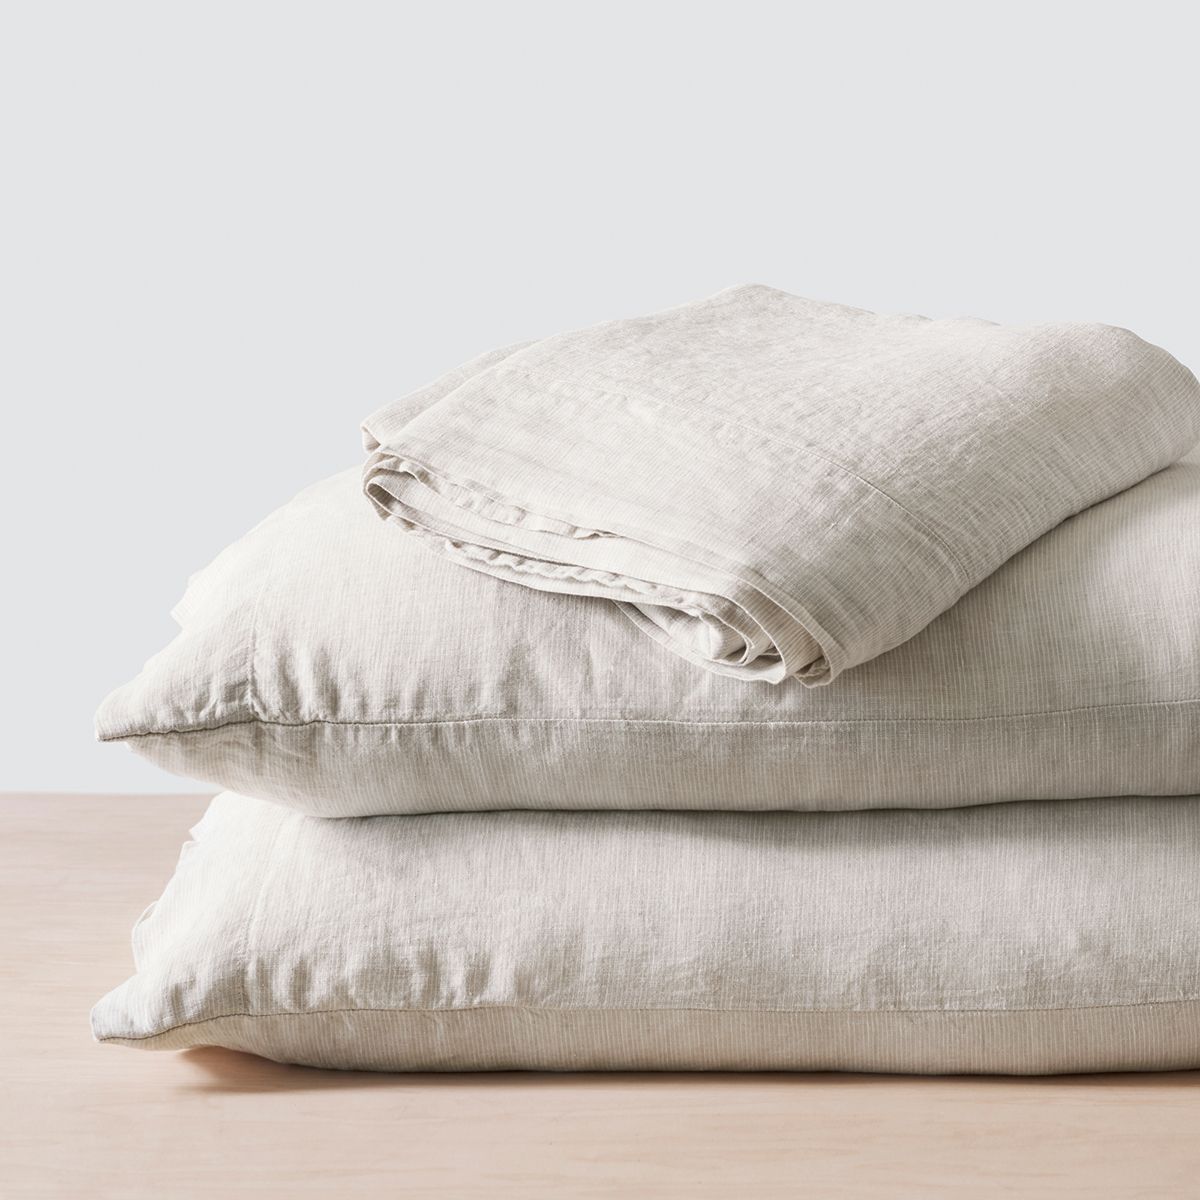 The Citizenry Stonewashed Linen Sheet Set | The Container Store